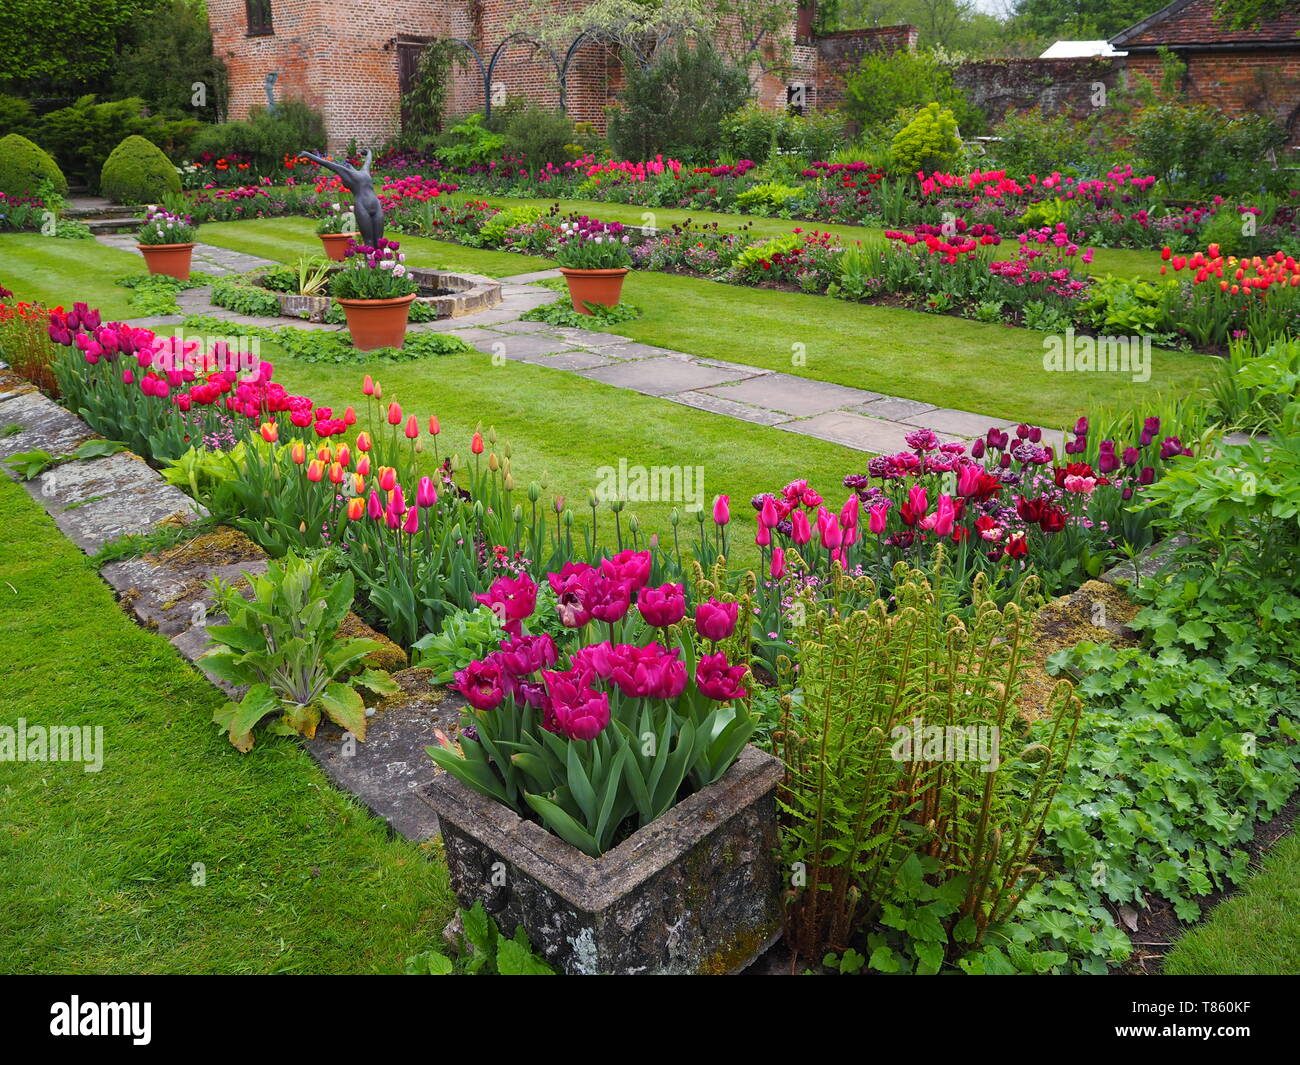 Chenies Manor Sunken Garden with Pavilion and pond in early May showing colourful tulips, sculpture and fresh green foliage beautifully landscaped. Stock Photo